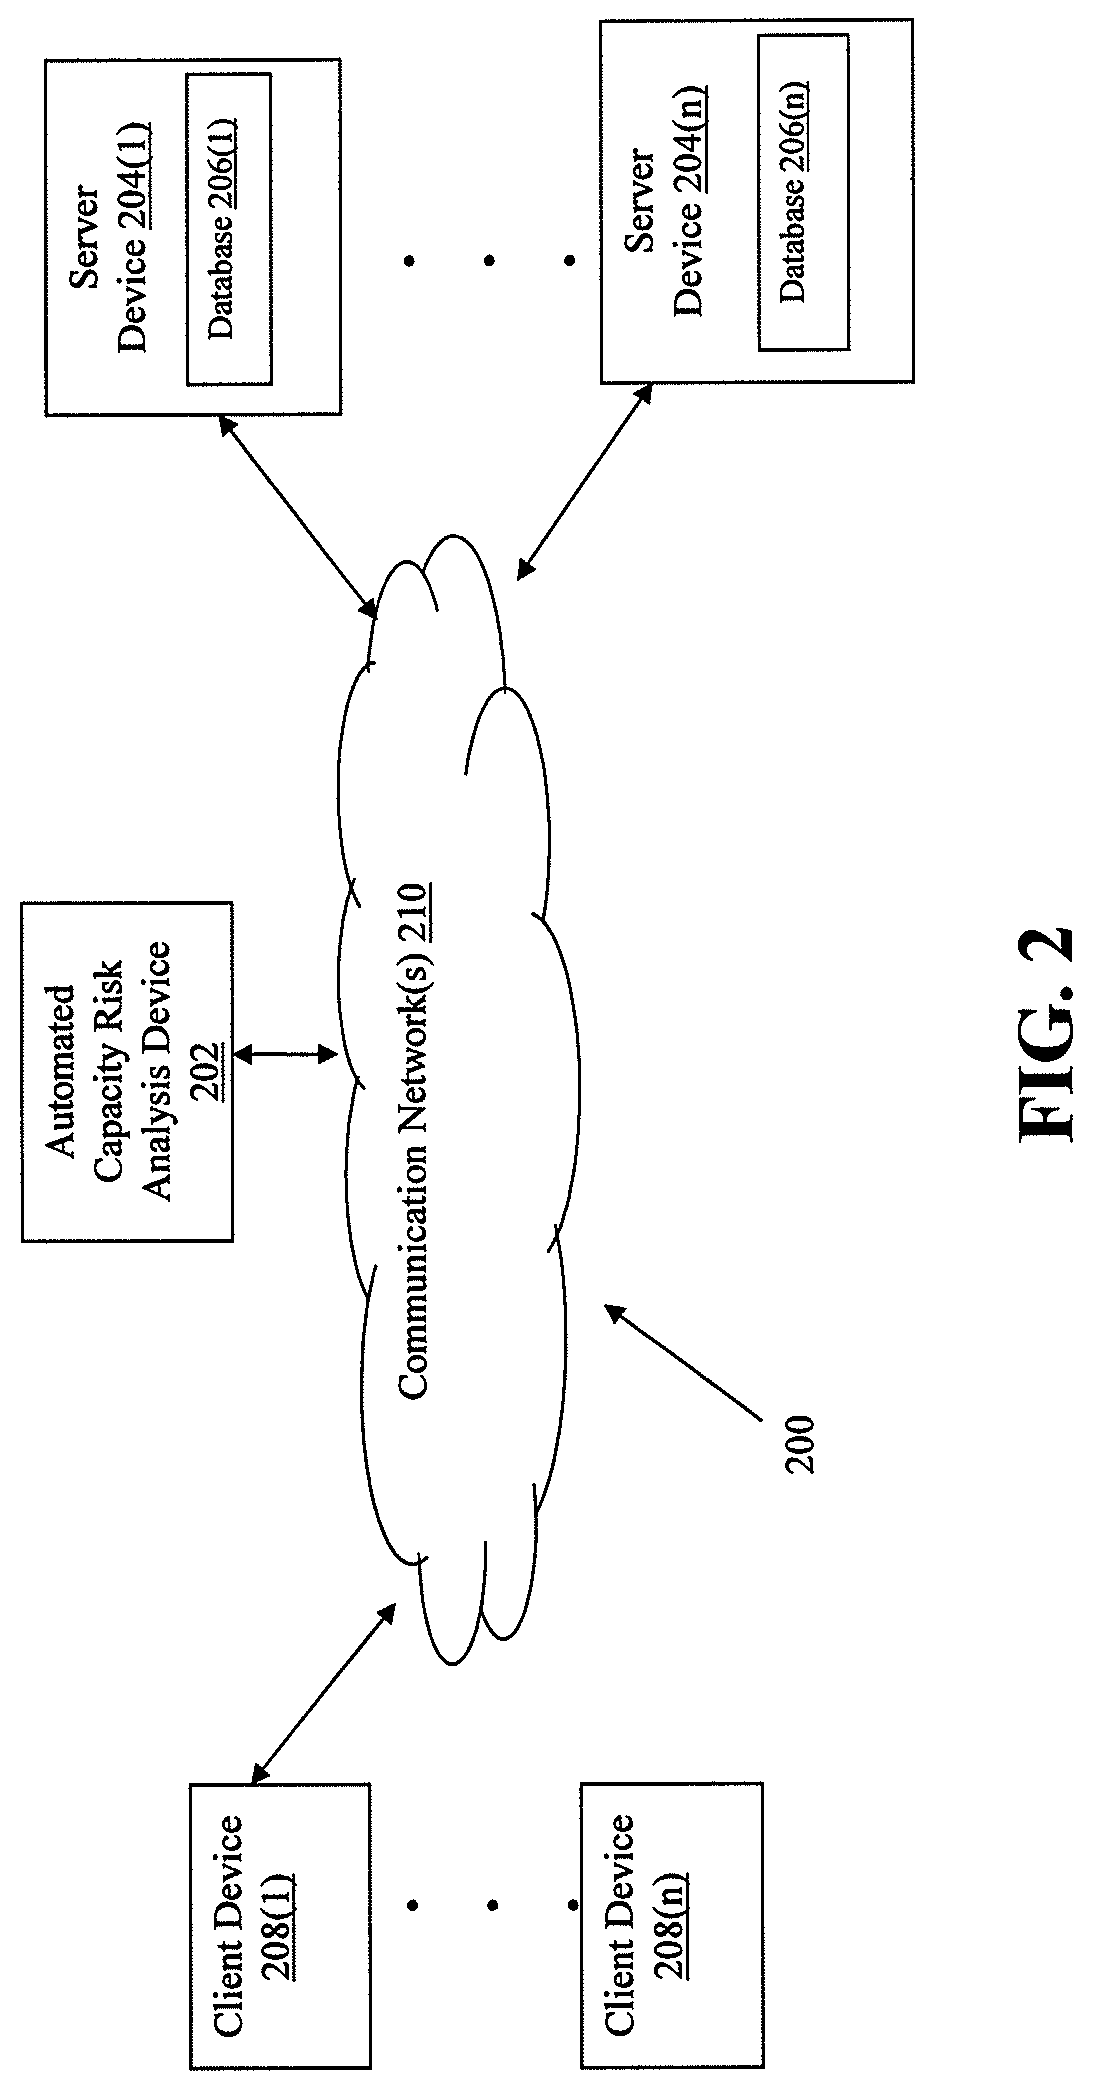 Methods and systems for improved automated file system capacity risk analysis